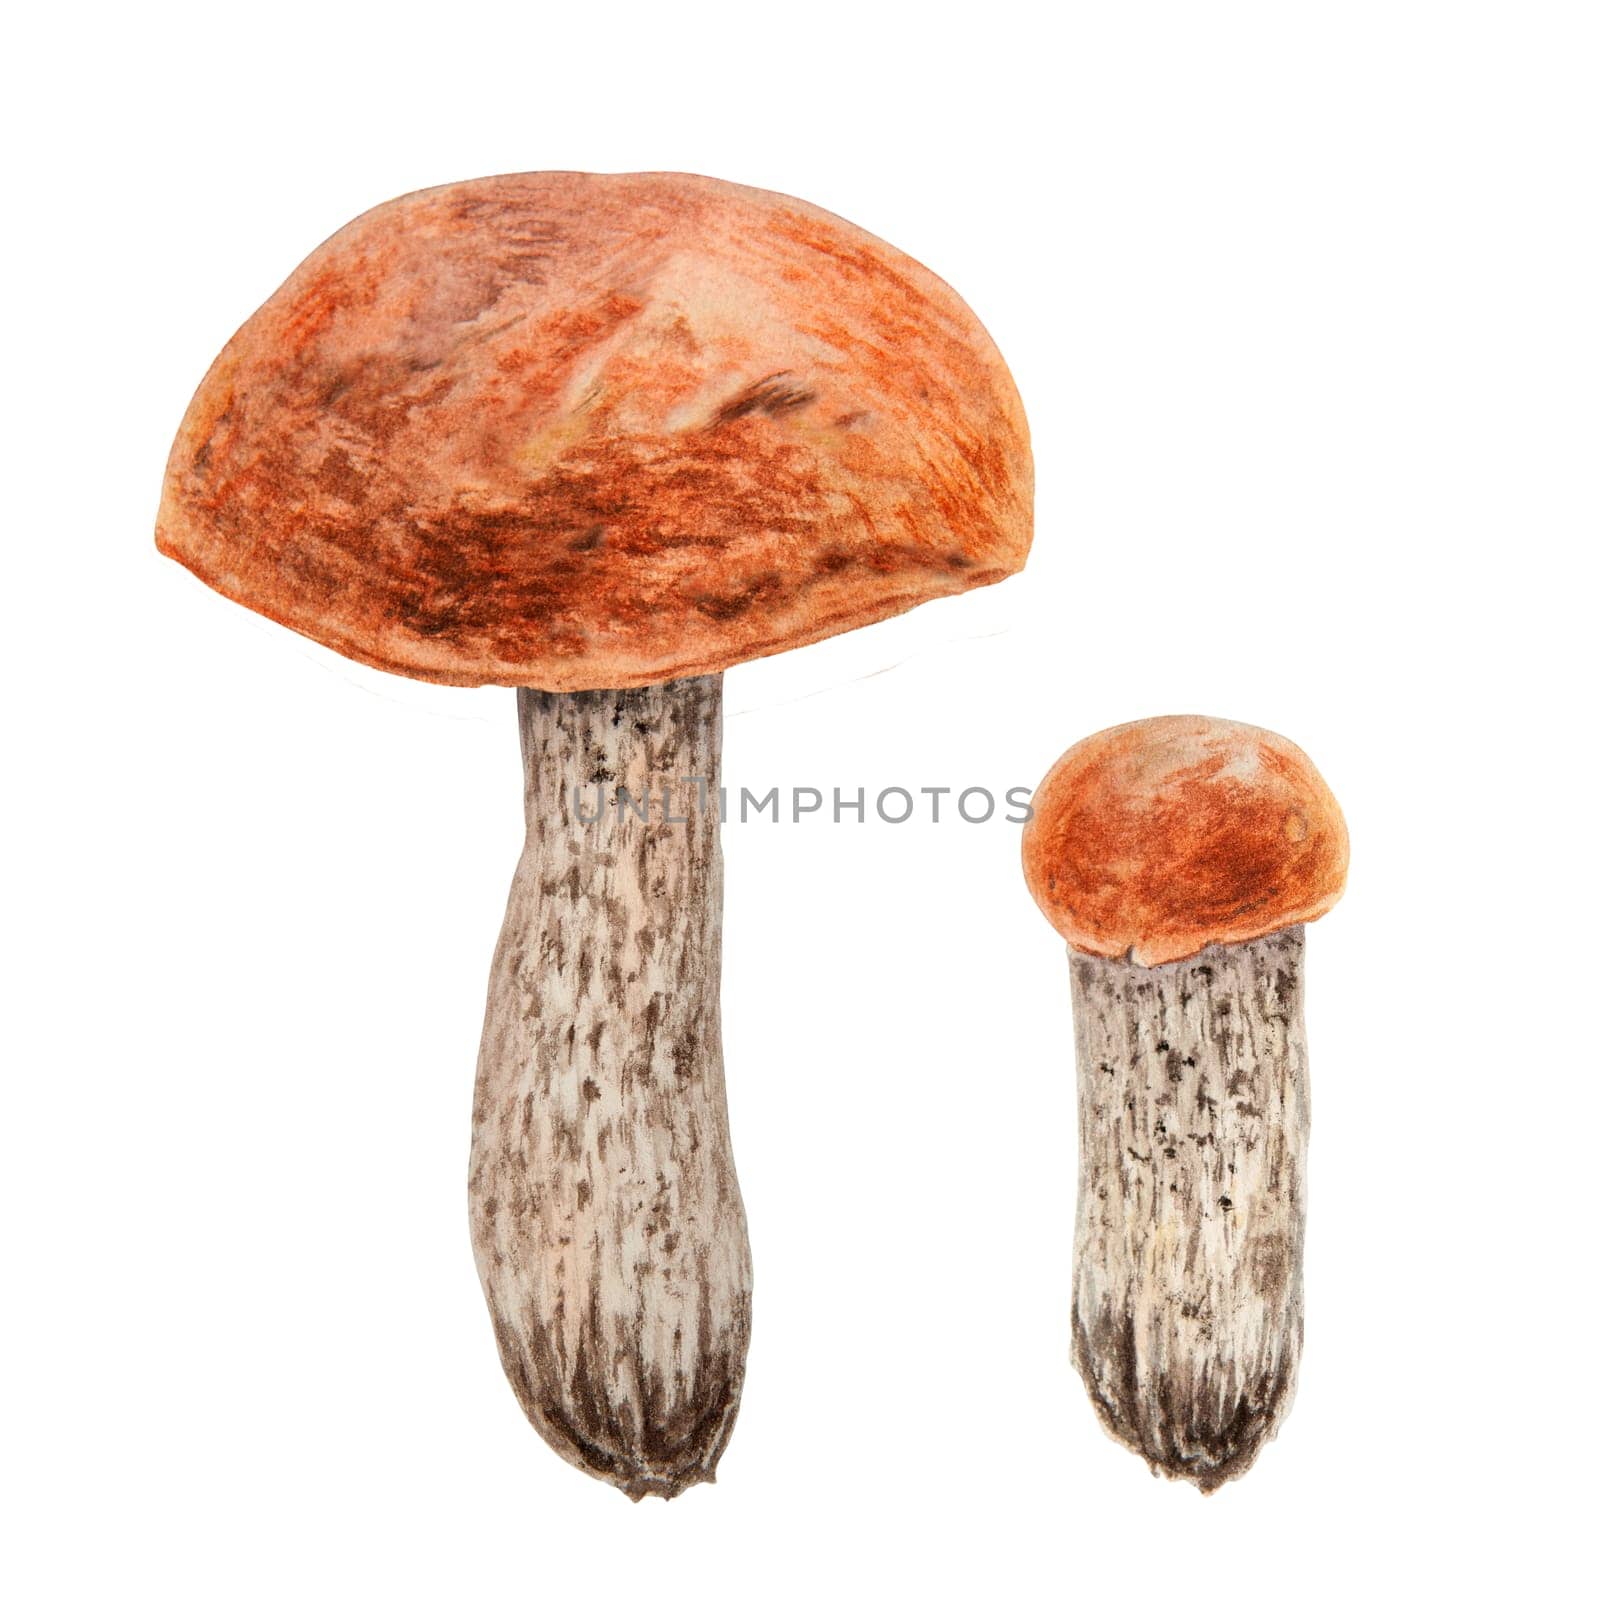 Wild edible mushrooms with red cap. Watercolor hand drawn botanical realistic illustration. Forest boletus clip art. Isolated painting for fabric, postcards, invitations, menus, prints, packing paper by florainlove_art